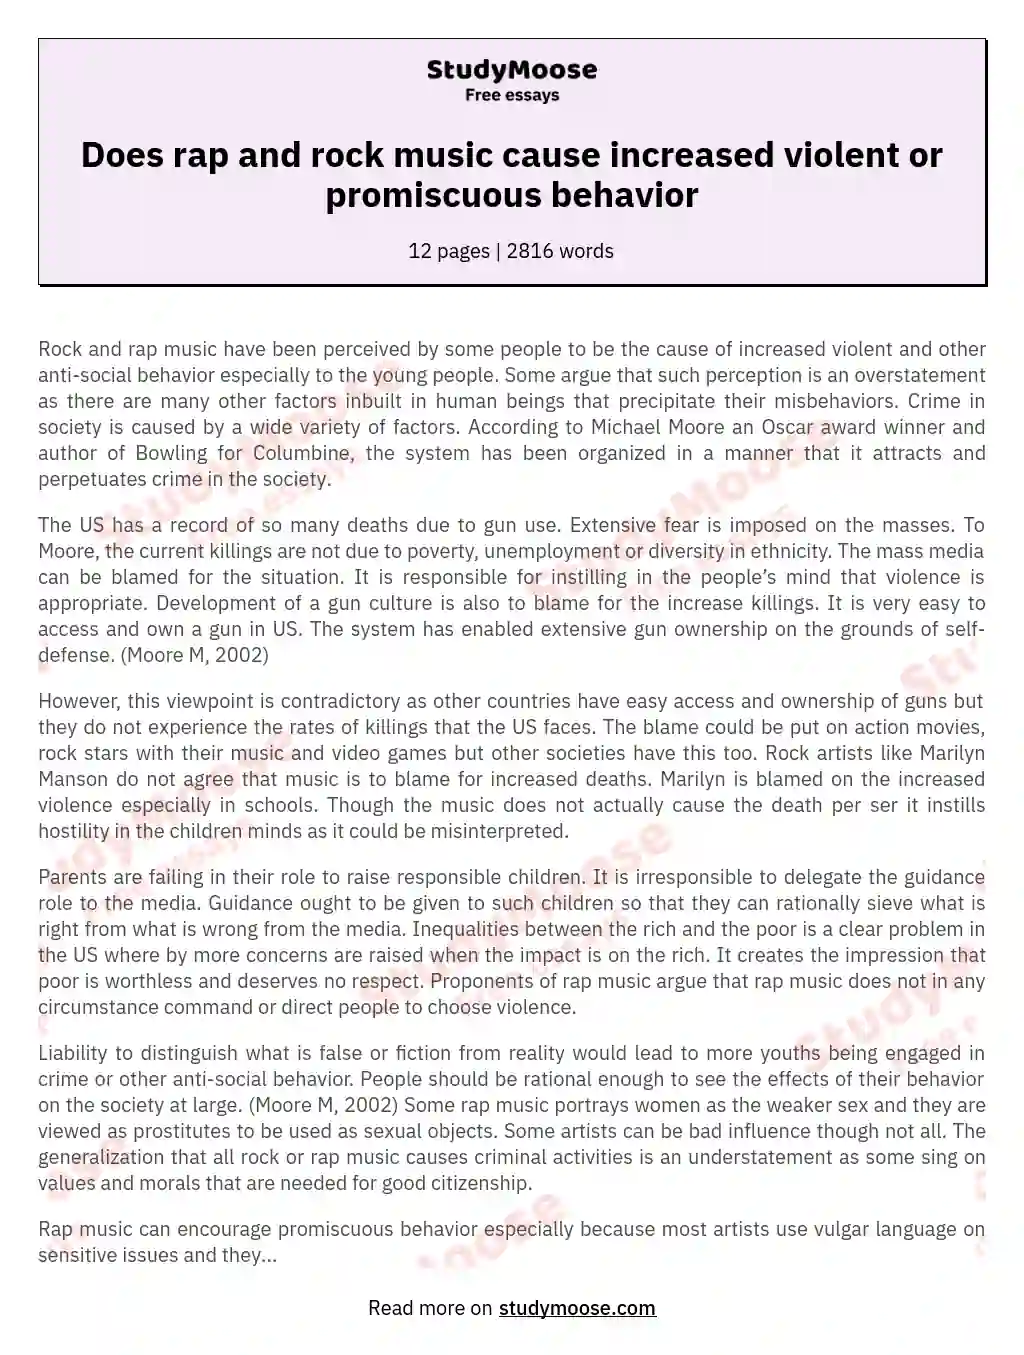 Does rap and rock music cause increased violent or promiscuous behavior essay